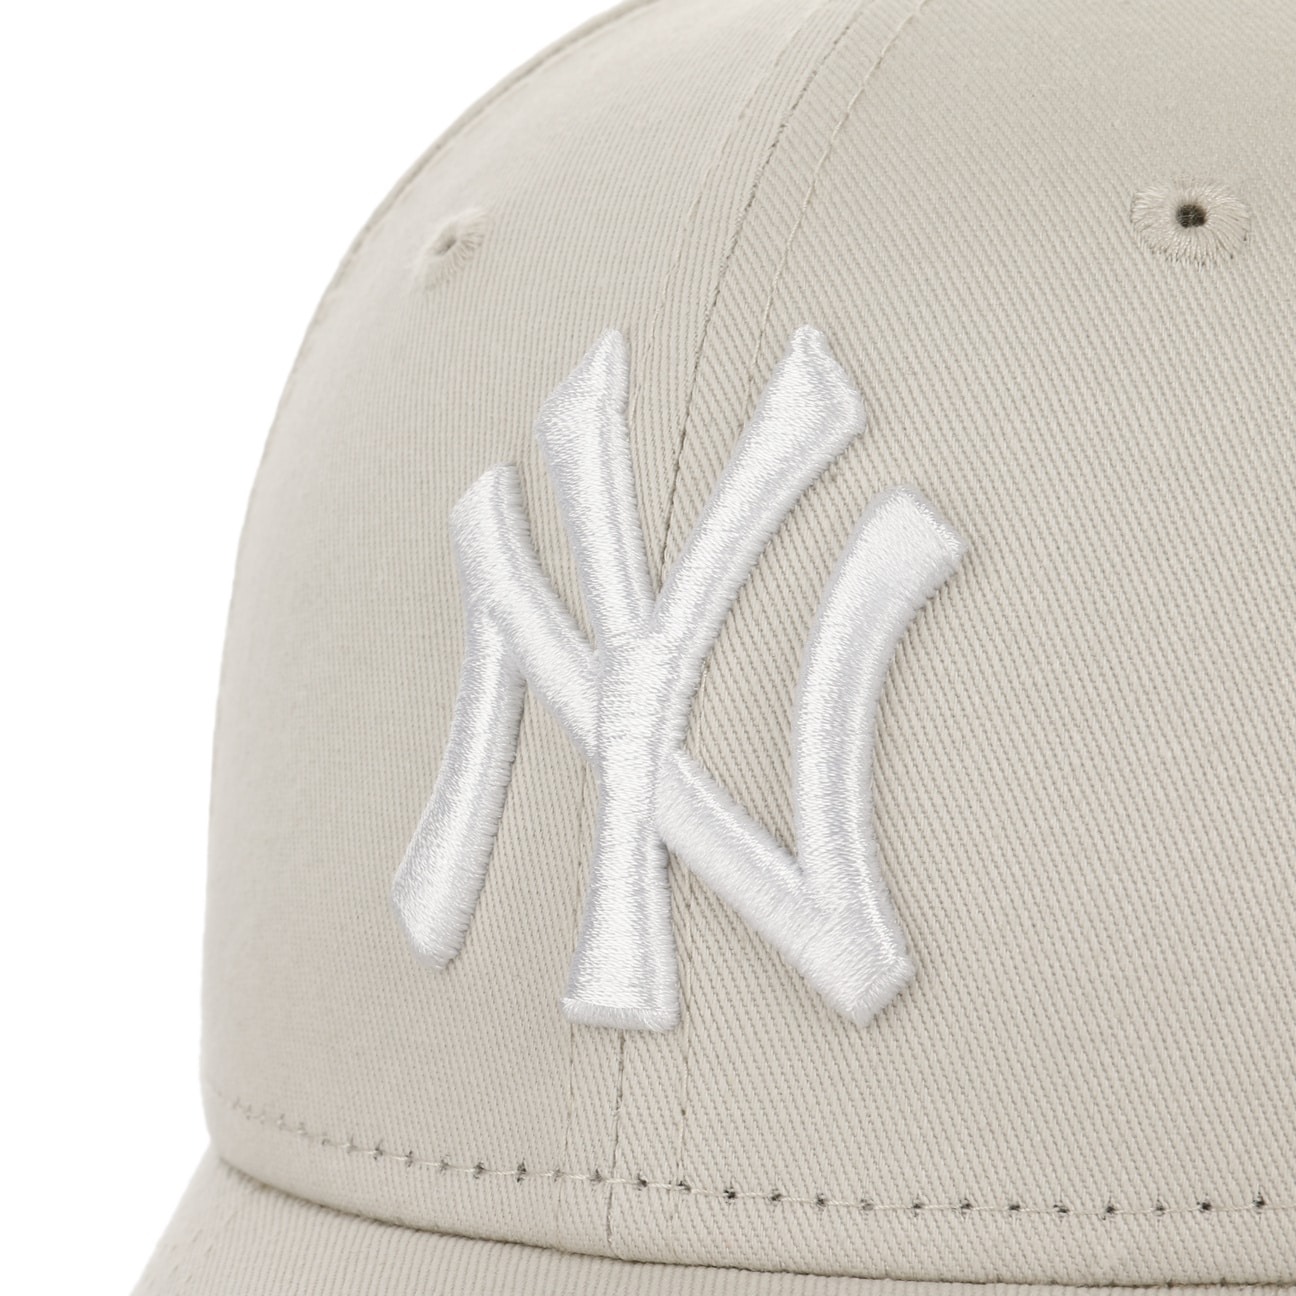 9Forty Female Essential Yankees Cap by New Era - 29,95 €